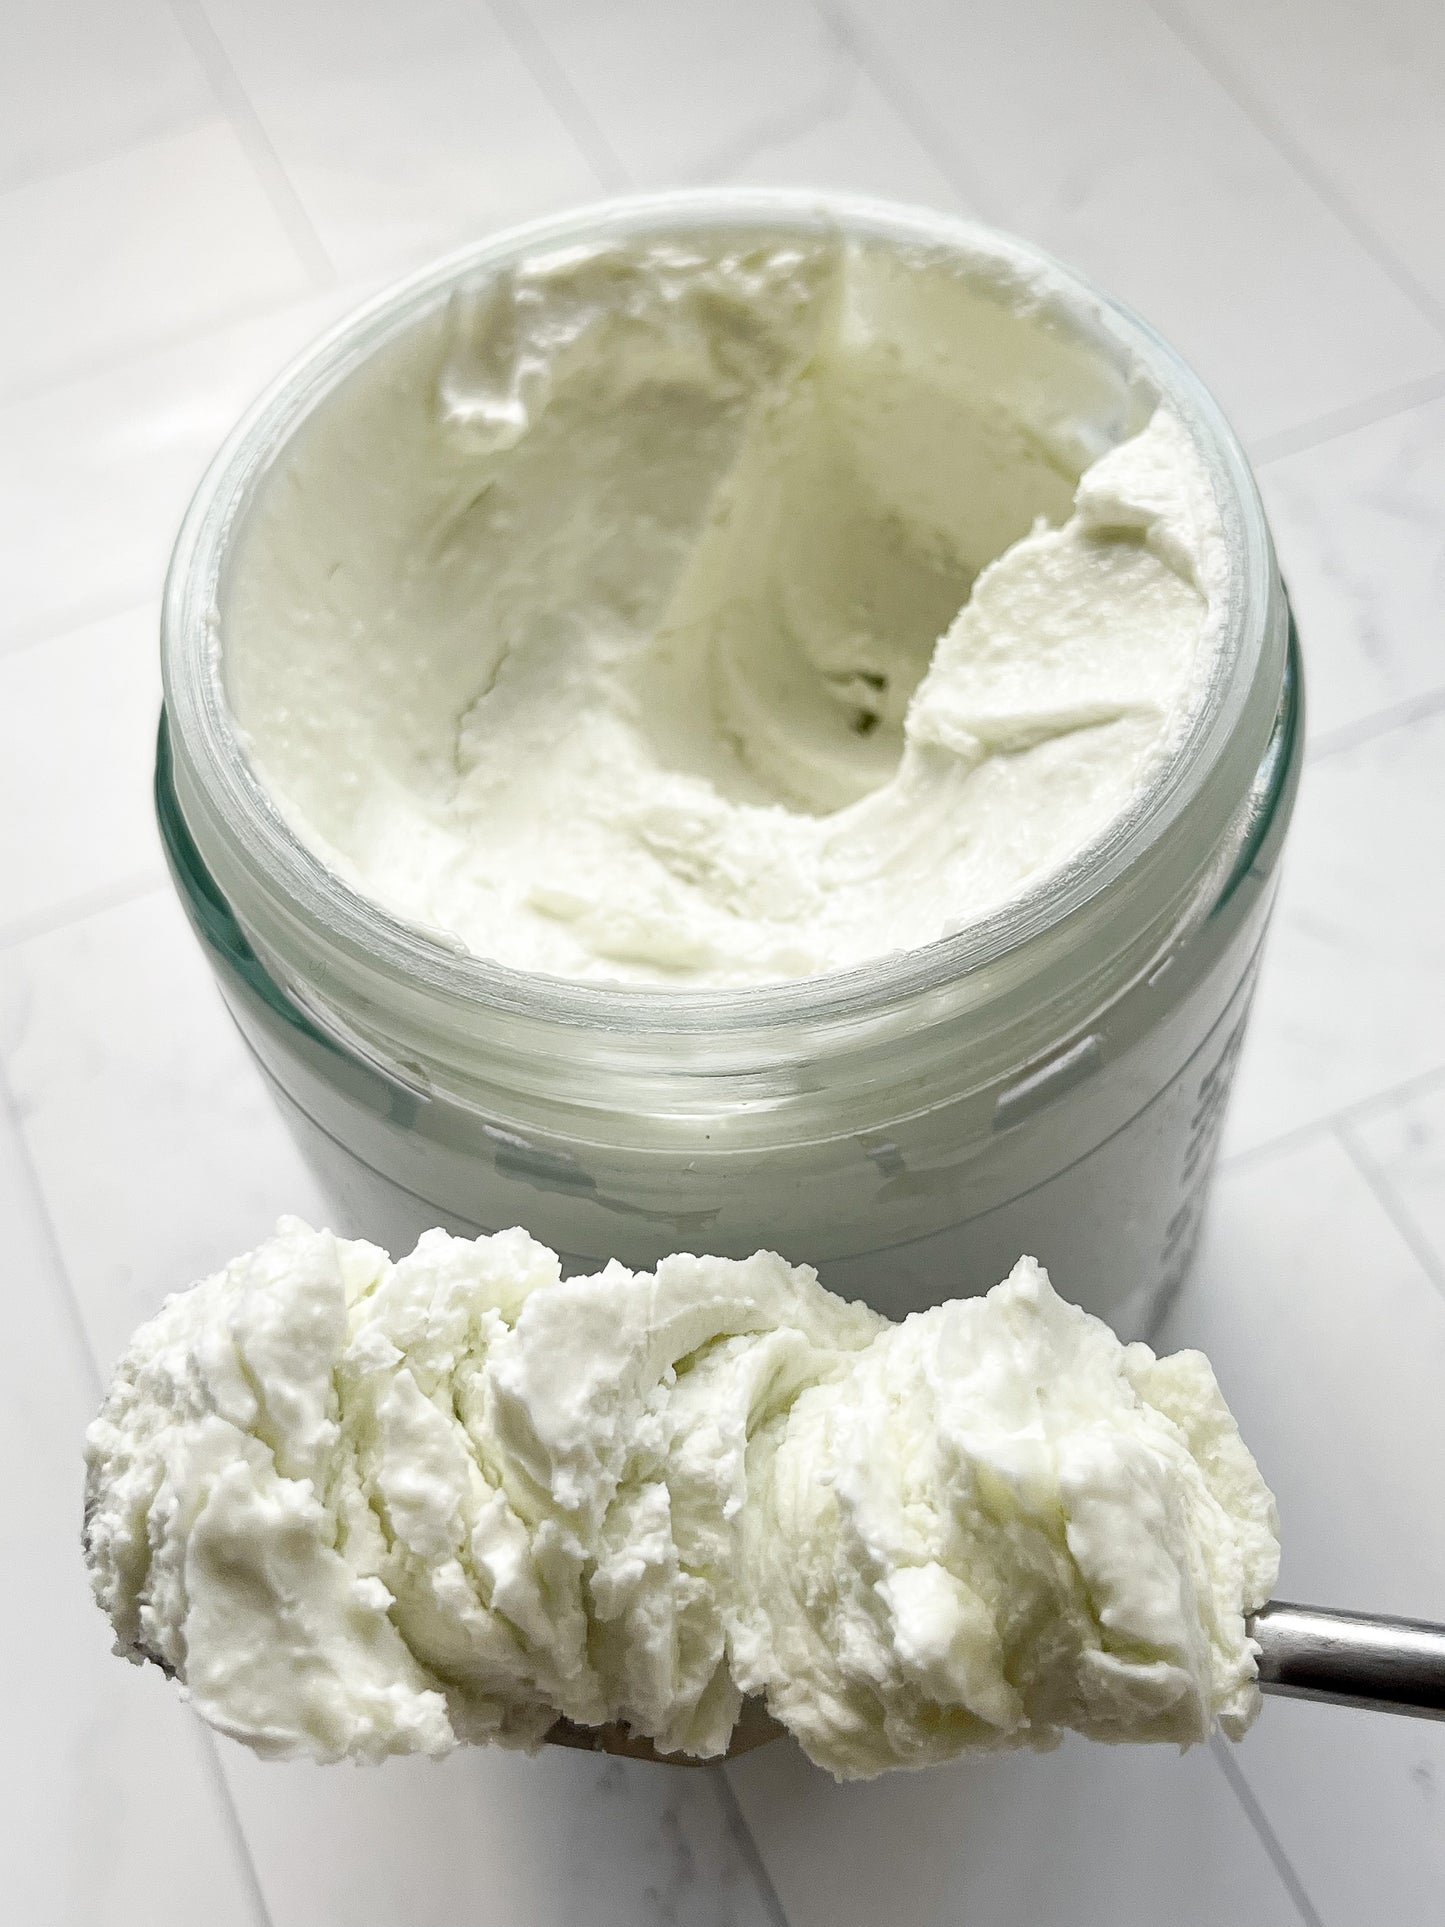 An open jar of the citrus body butter with a spoonful of the body butter to show the consistence.